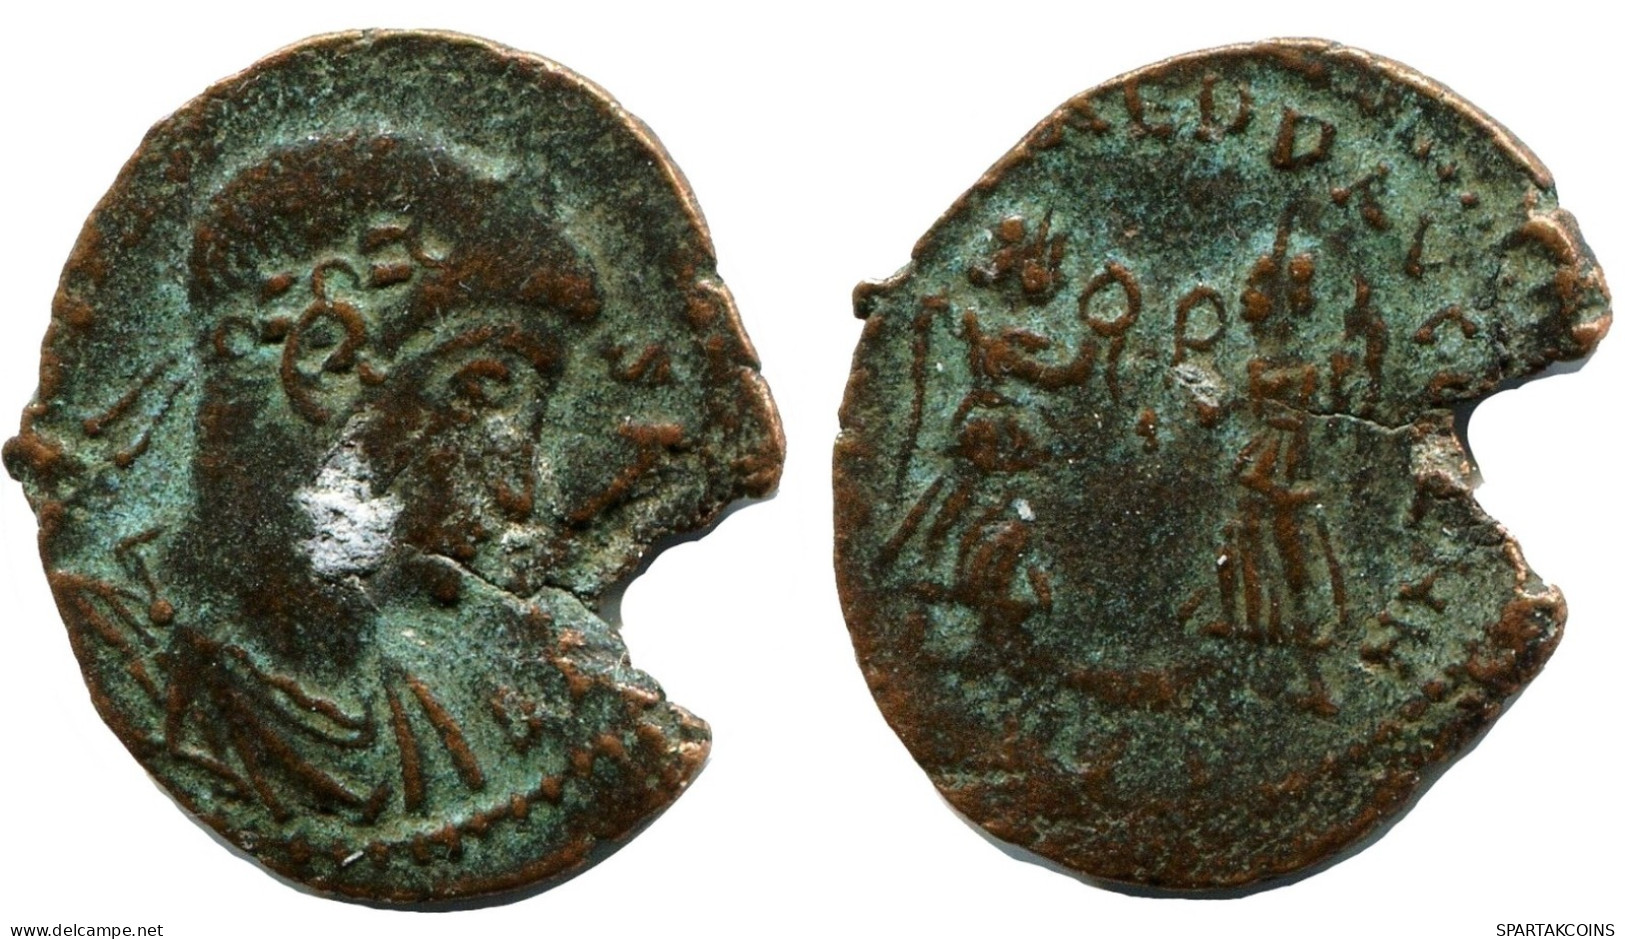 CONSTANS MINTED IN ROME ITALY FROM THE ROYAL ONTARIO MUSEUM #ANC11494.14.U.A - El Imperio Christiano (307 / 363)